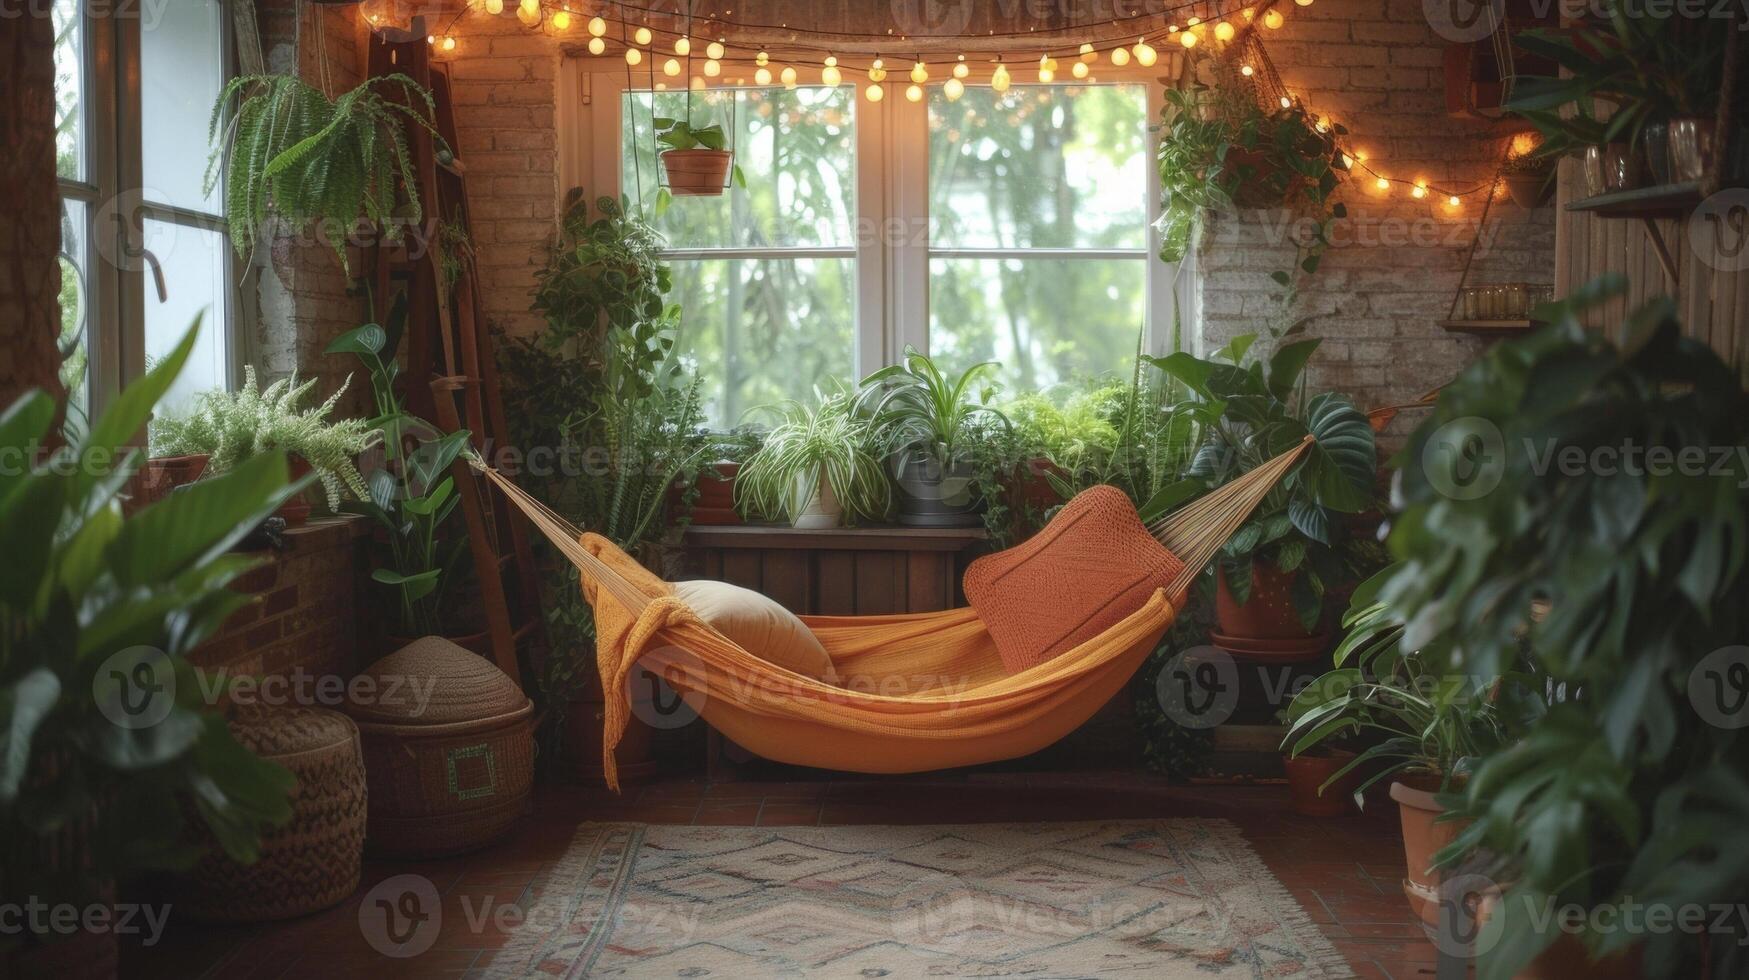 A small balcony transformed into an oasis with a hammock chair surrounded by lush green plants and string lights for a relaxing retreat right at home photo